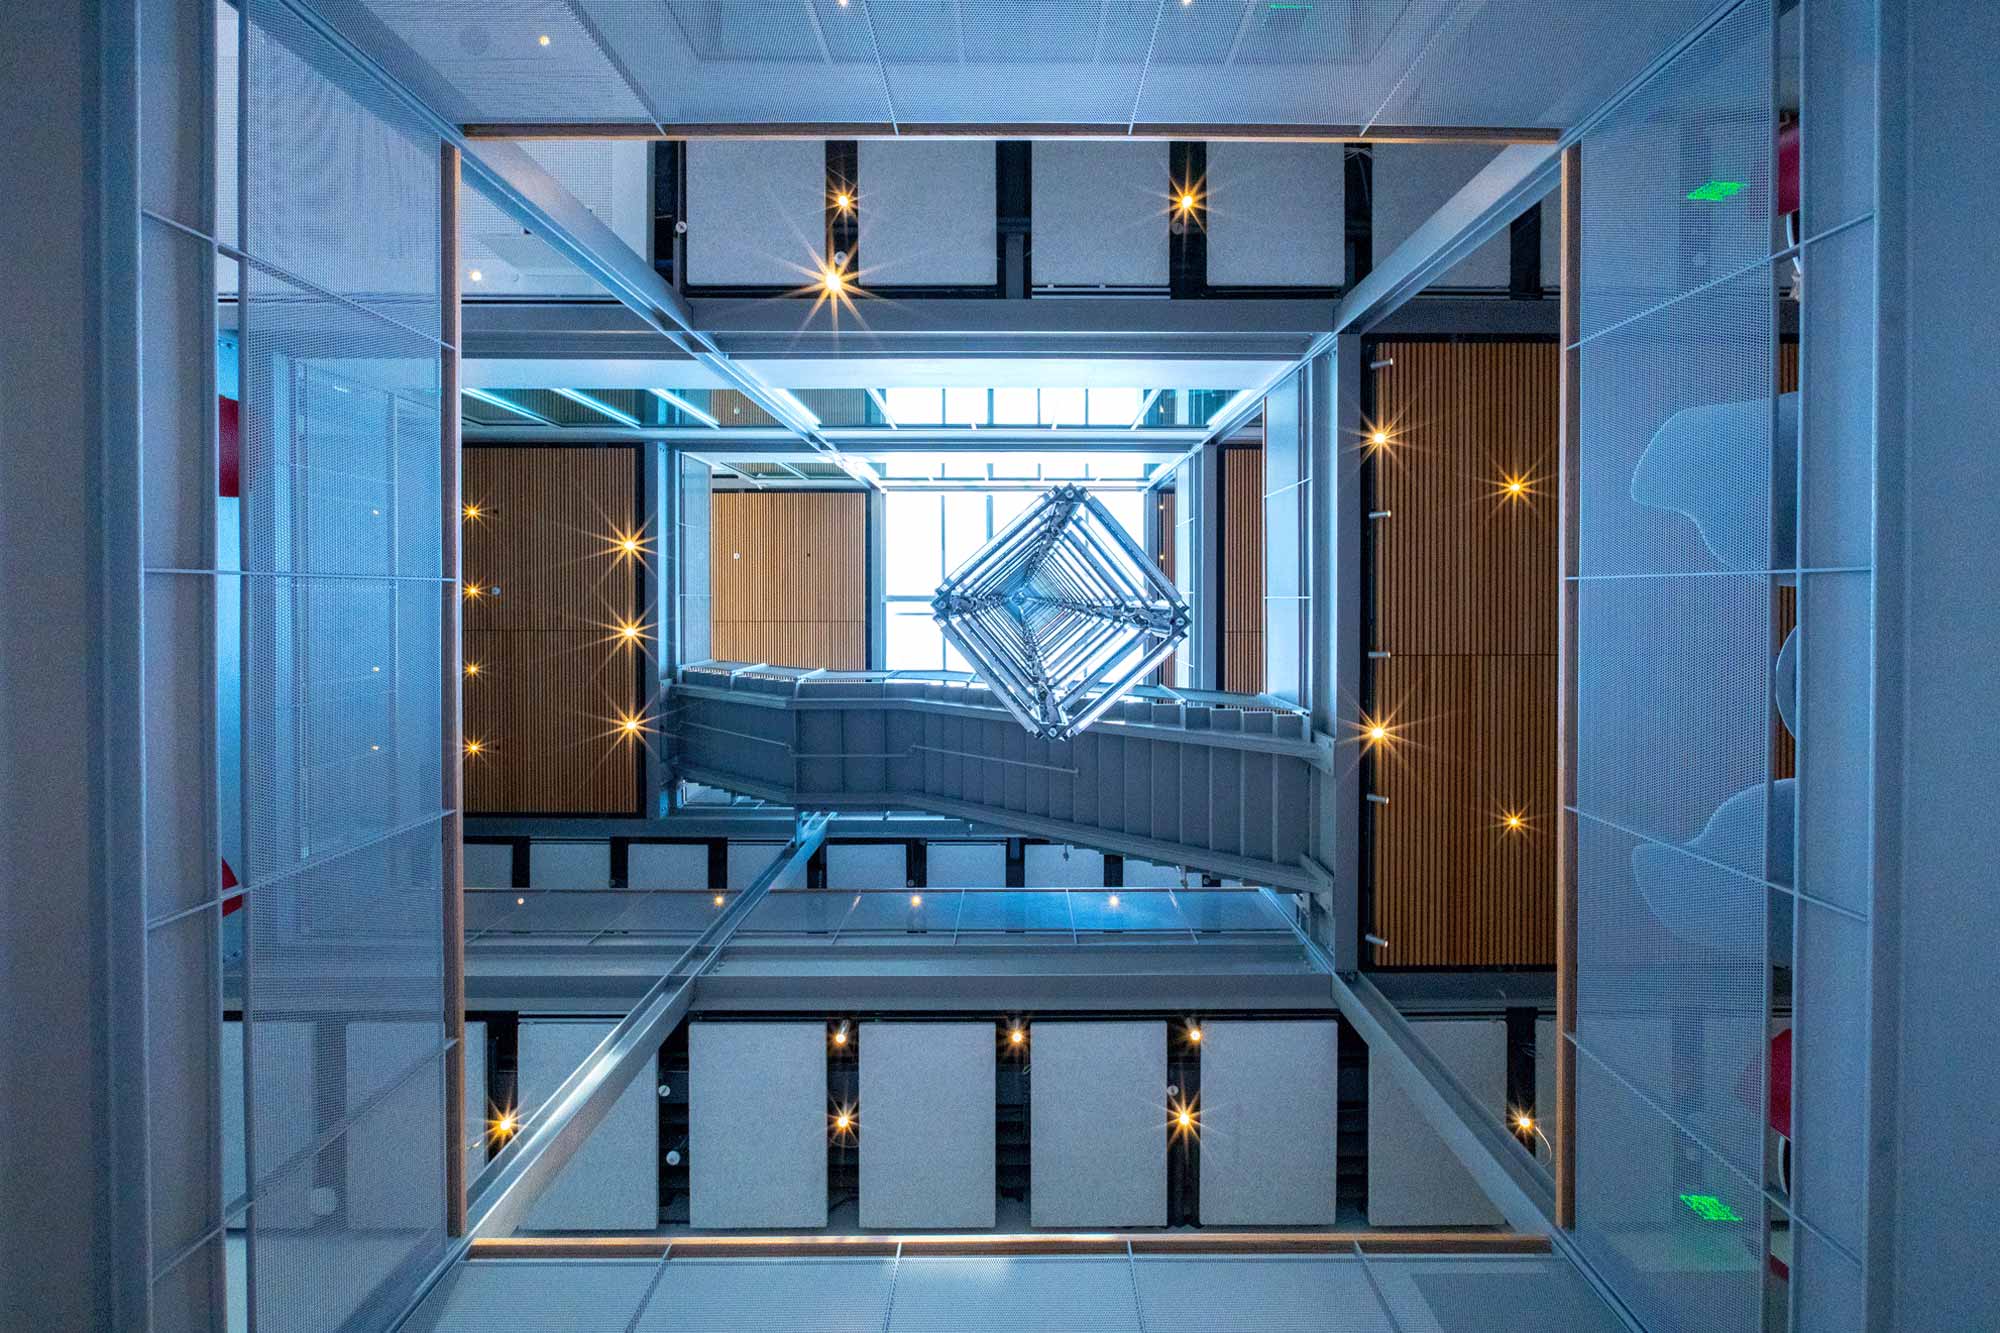 A geometrical and blue view looking up through the building